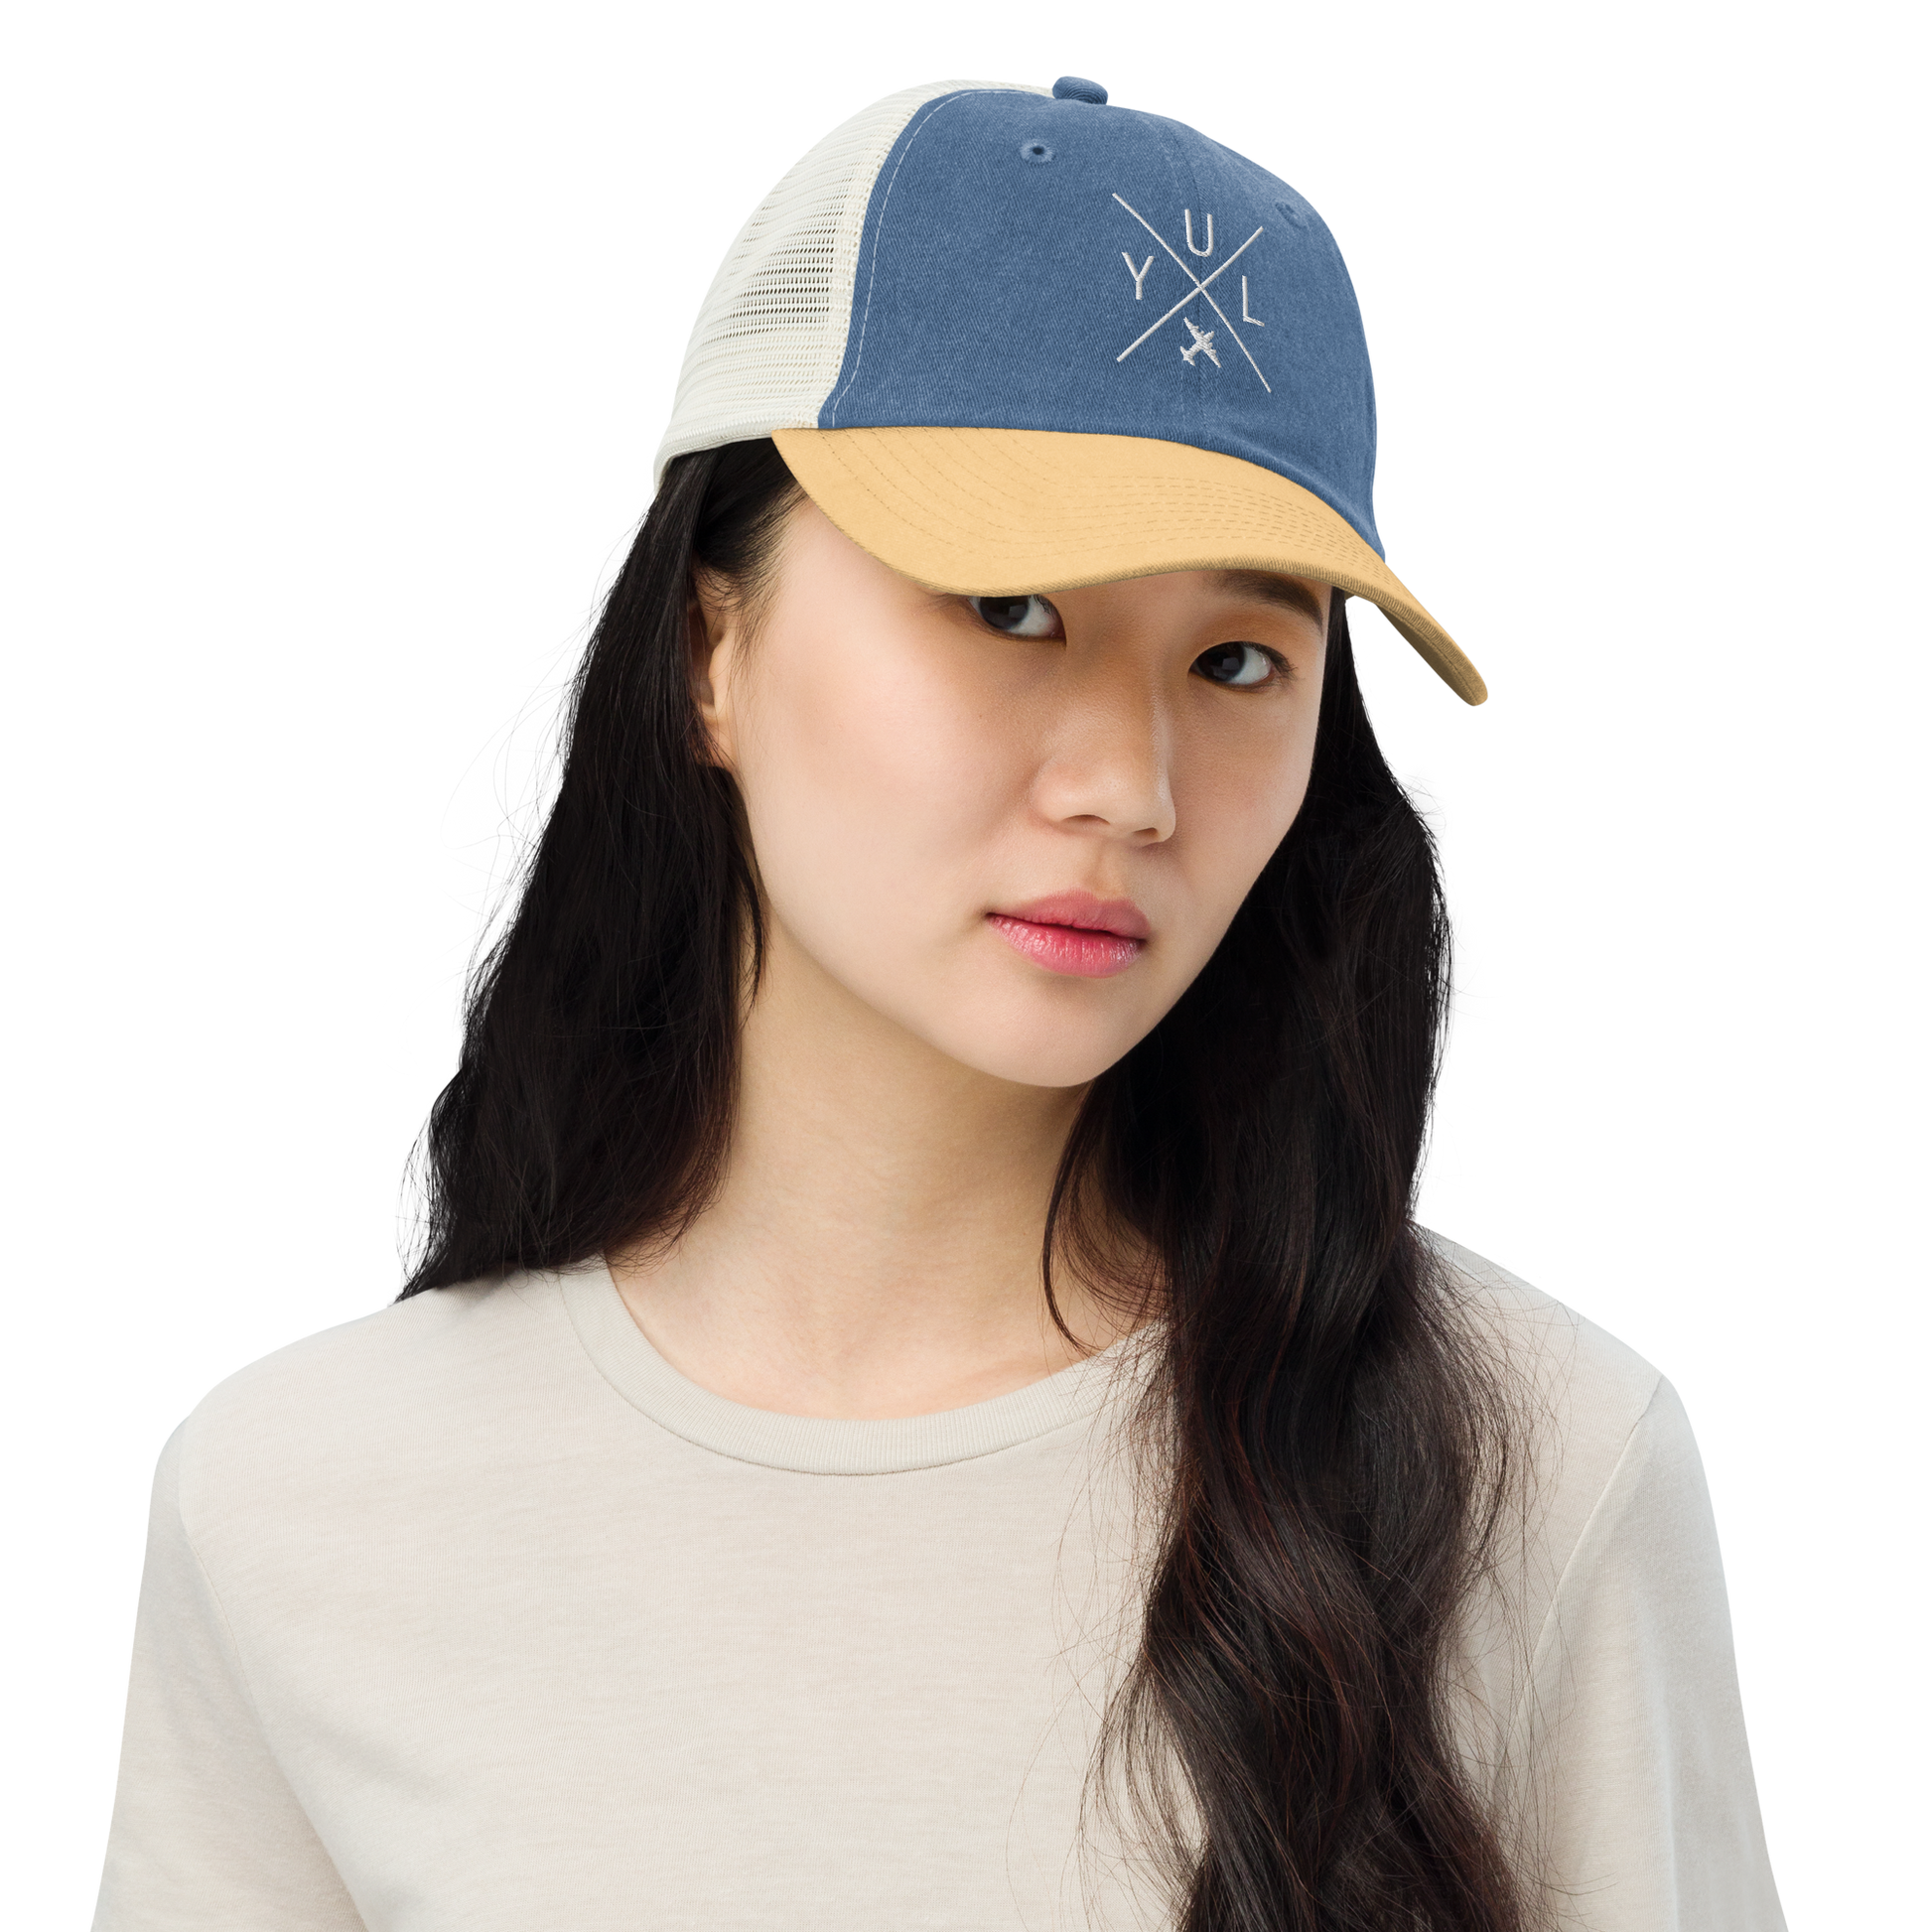 YHM Designs - YUL Montreal Pigment-Dyed Trucker Cap - Crossed-X Design with Airport Code and Vintage Propliner - White Embroidery - Image 03